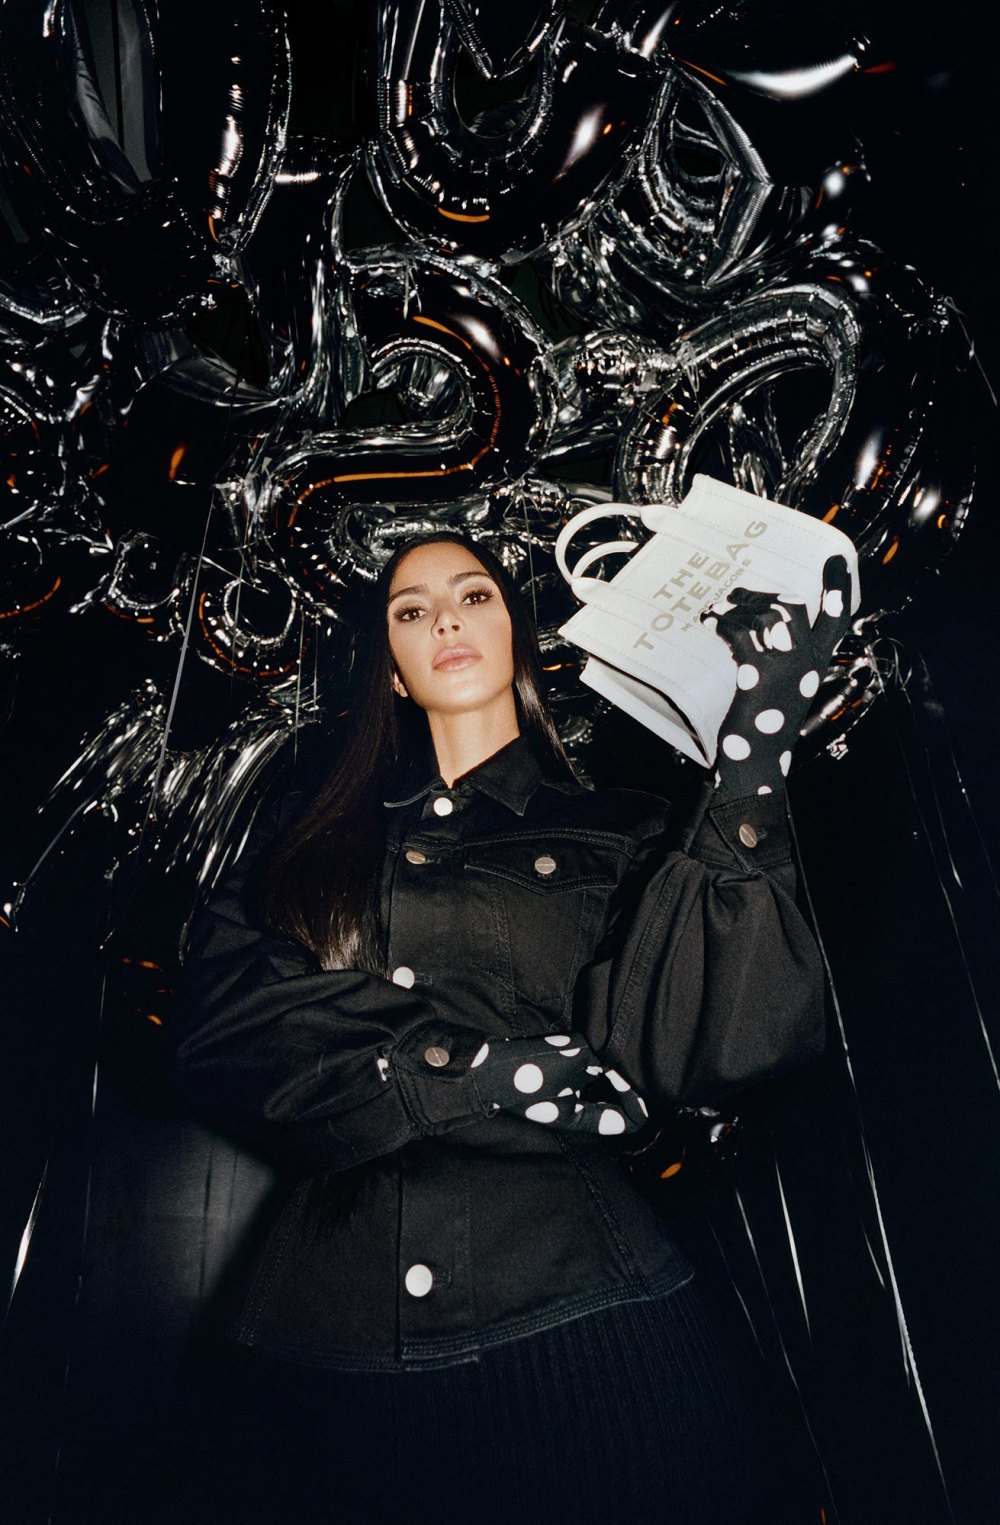 Kim Kardashian Is the New Face of Marc Jacobs